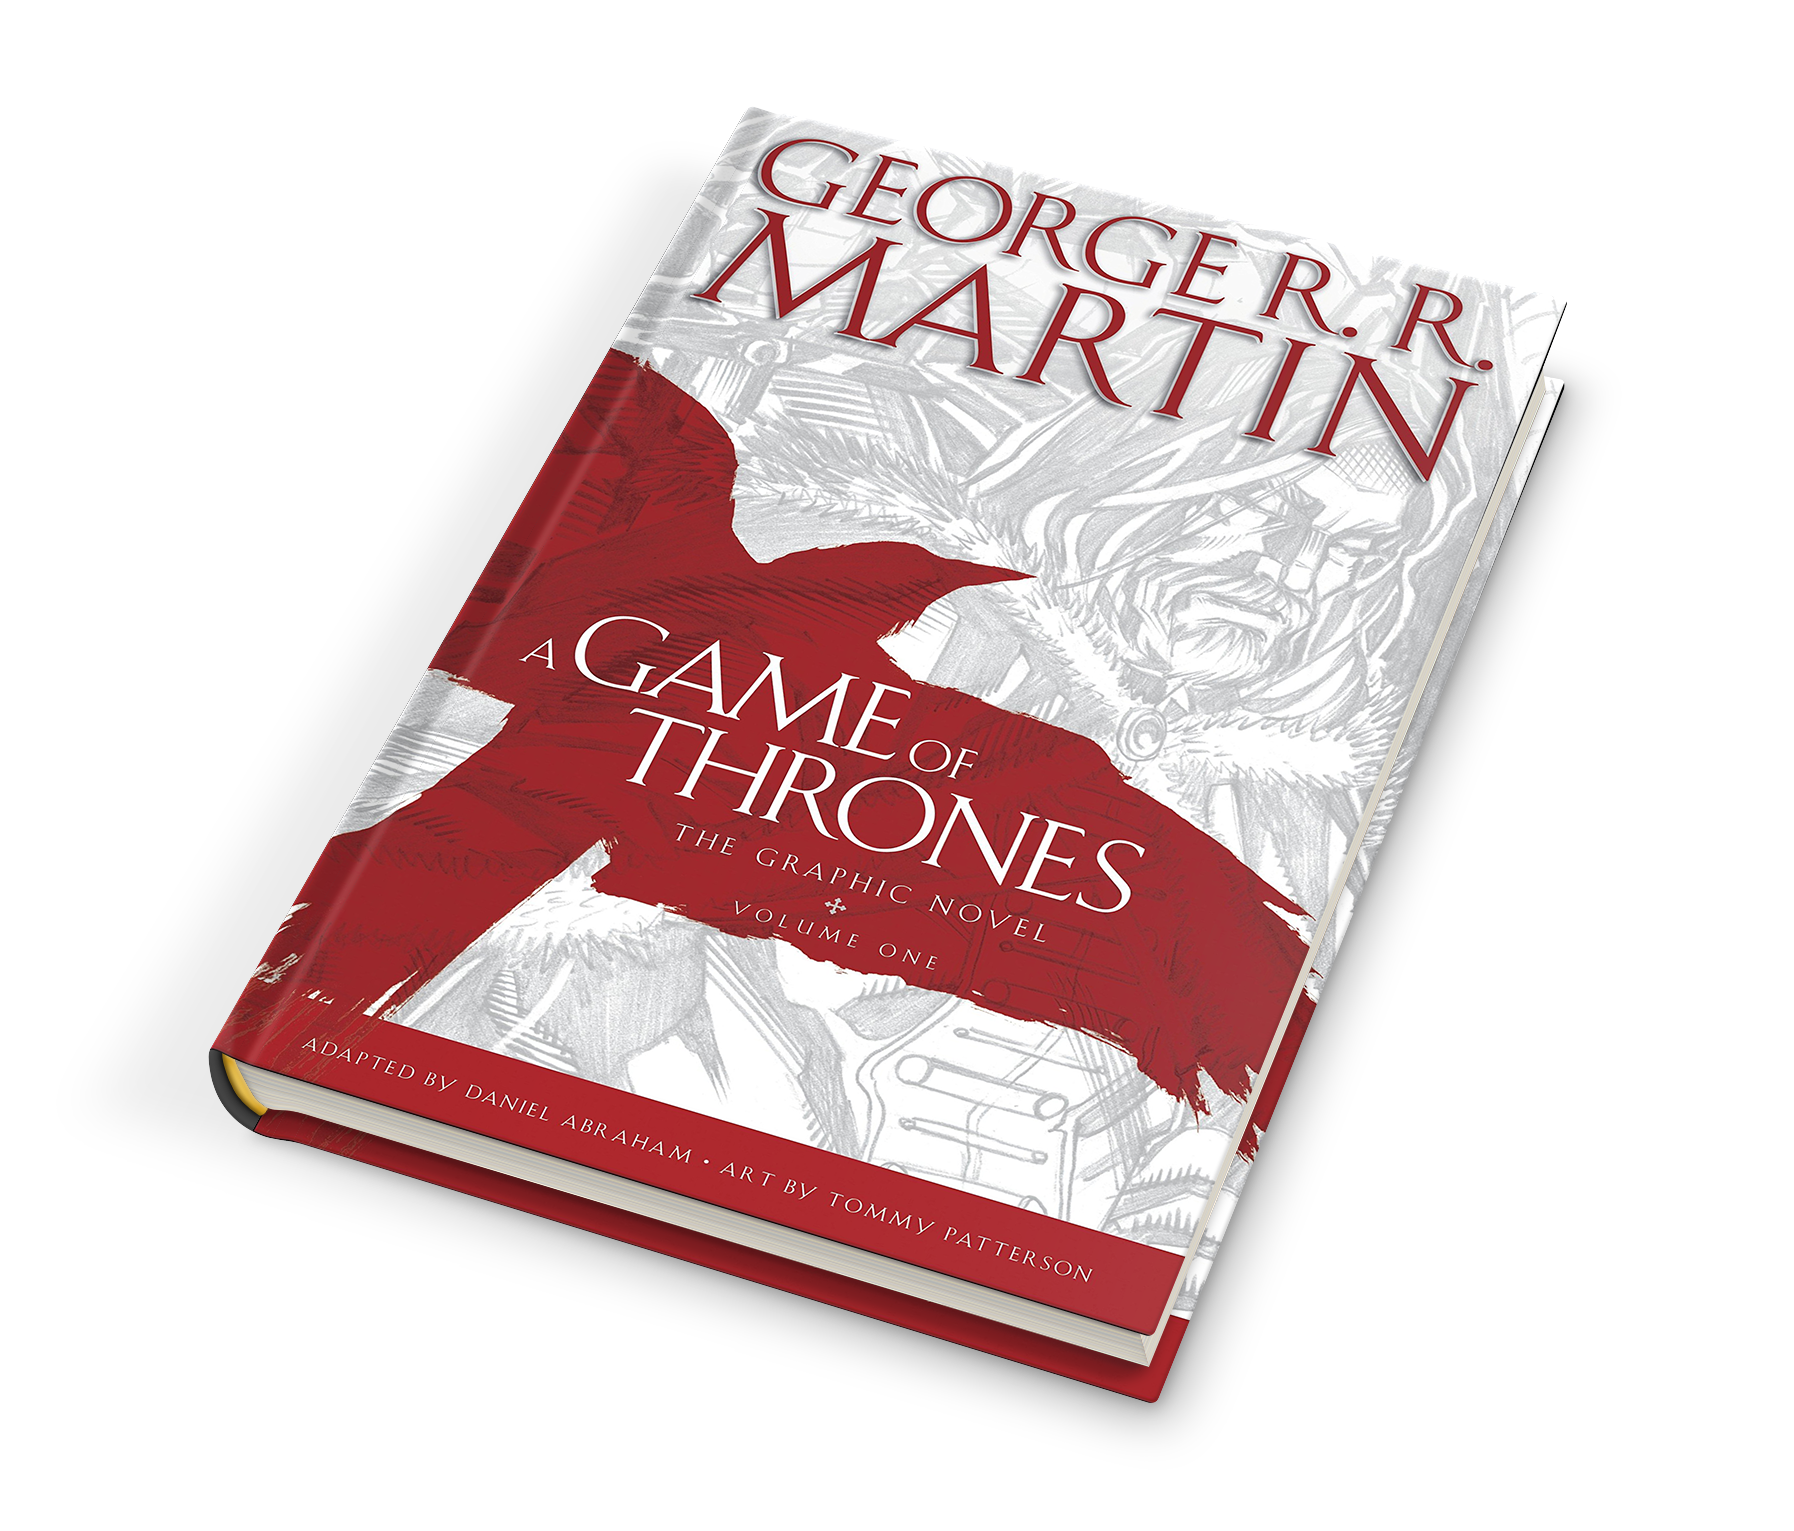 GAME OF THRONES: THE GRAPHIC NOVEL (Hardcover) 1